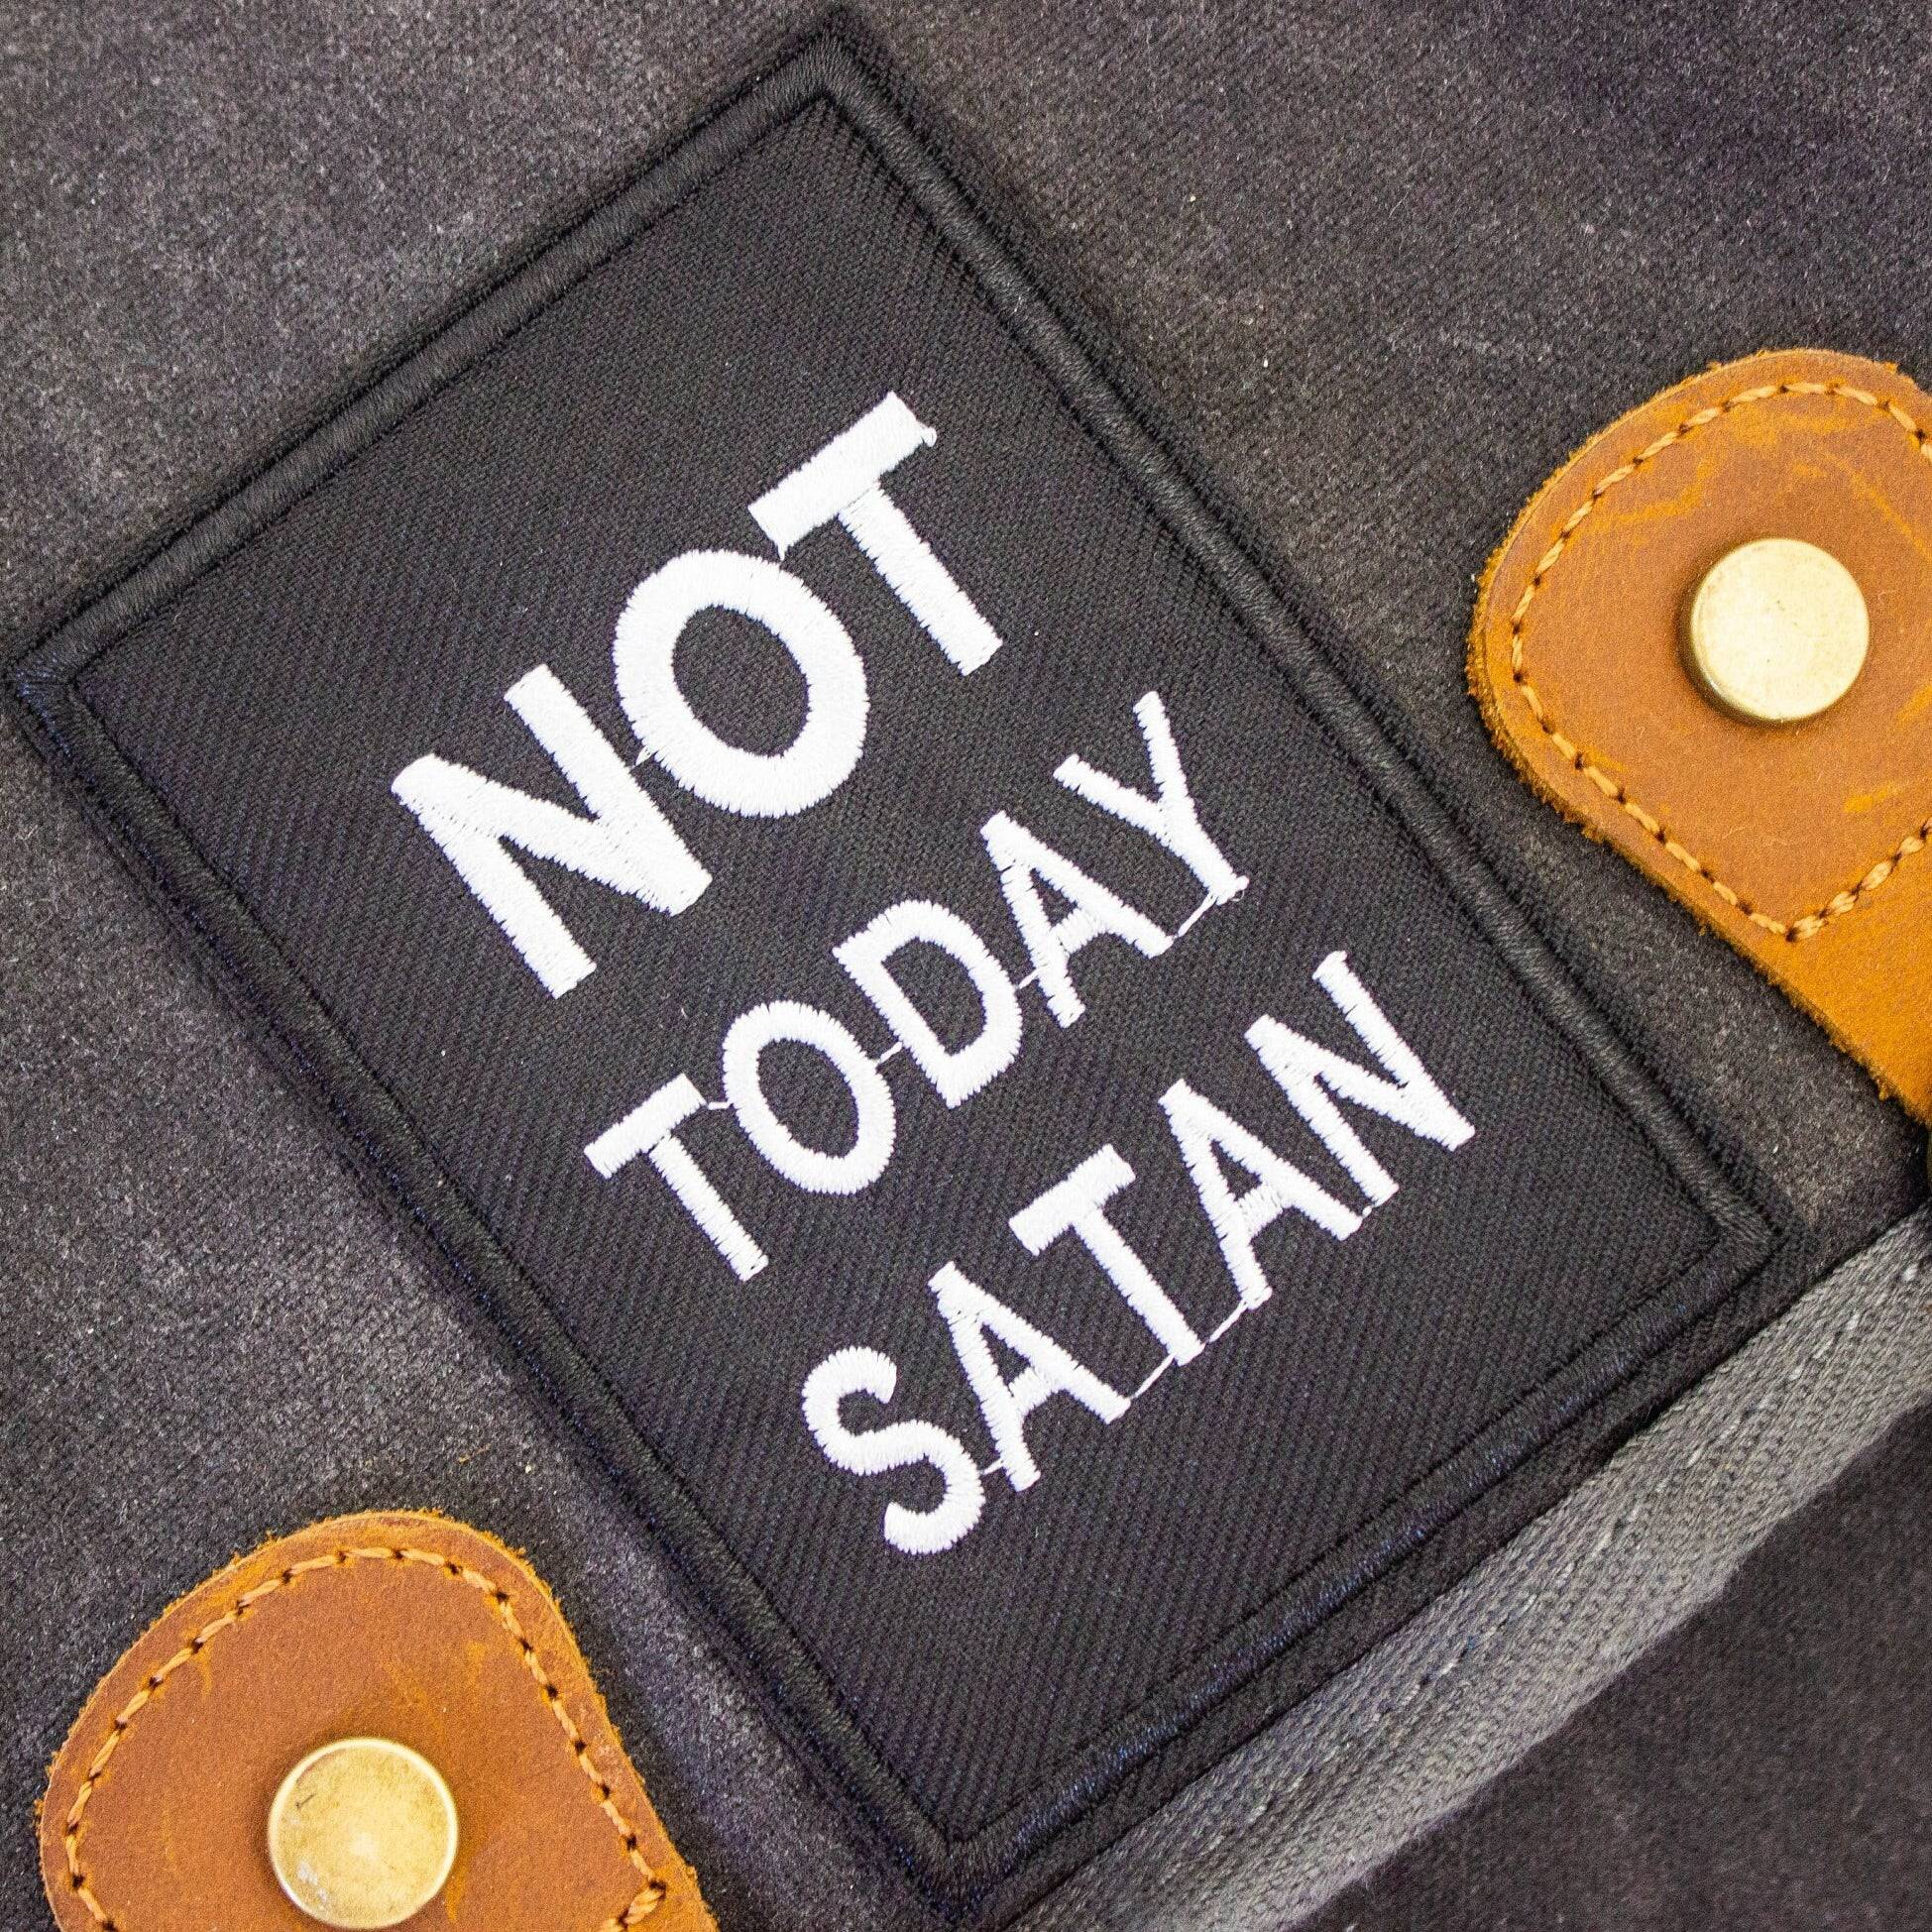 Not Today Satan Patch - Mystery Dice Goblin